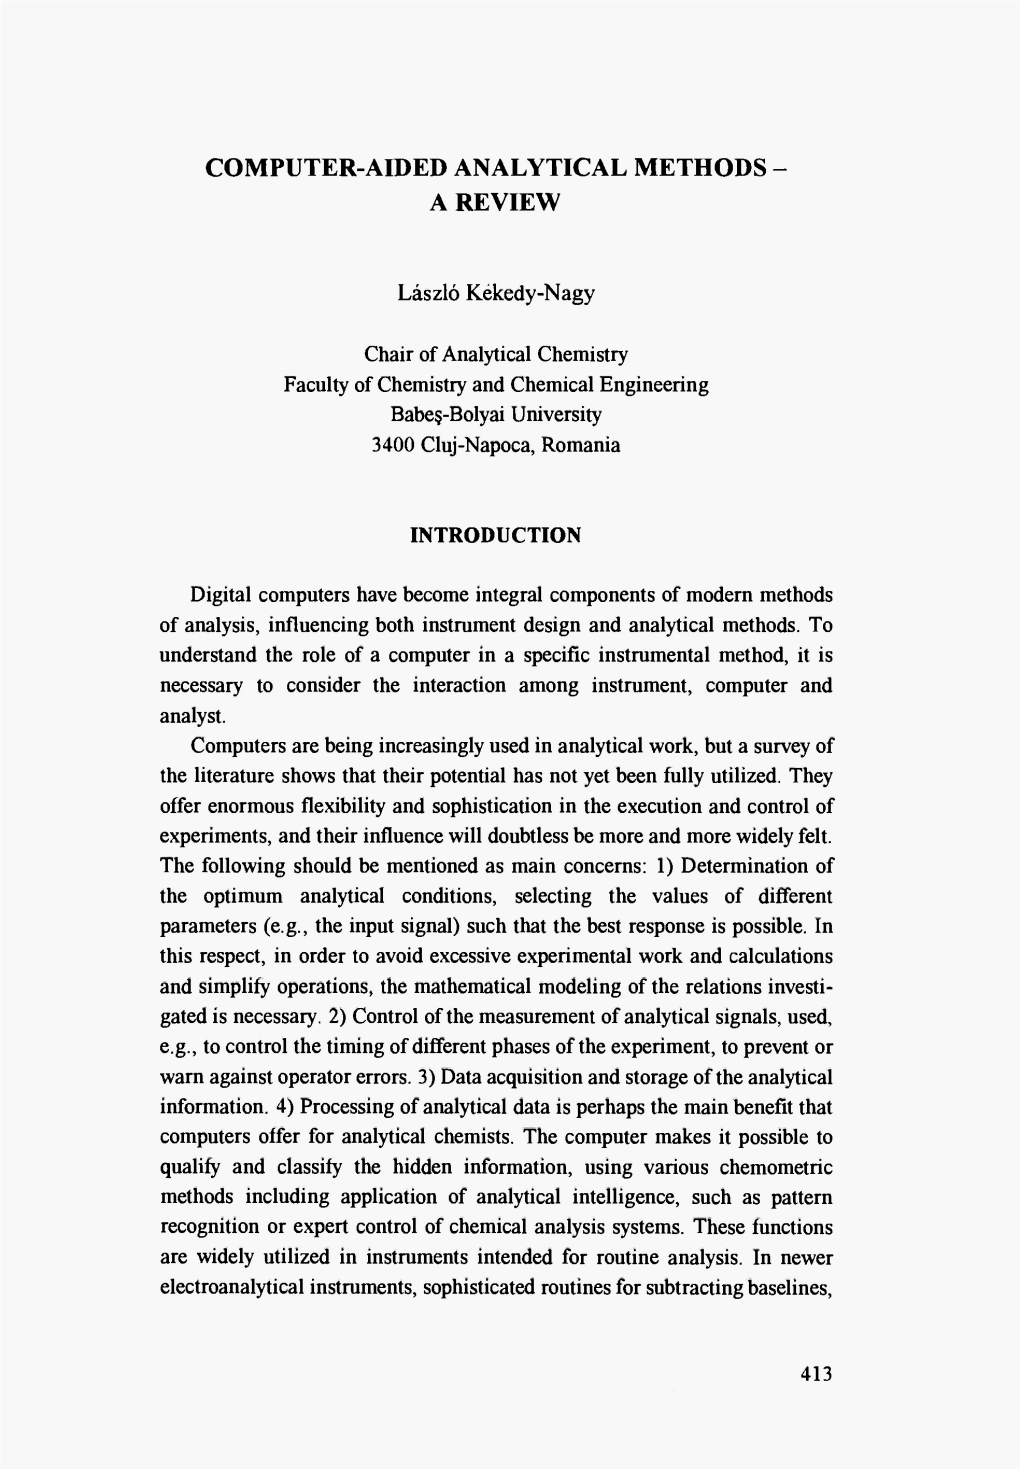 Computer-Aided Analytical Methods - a Review